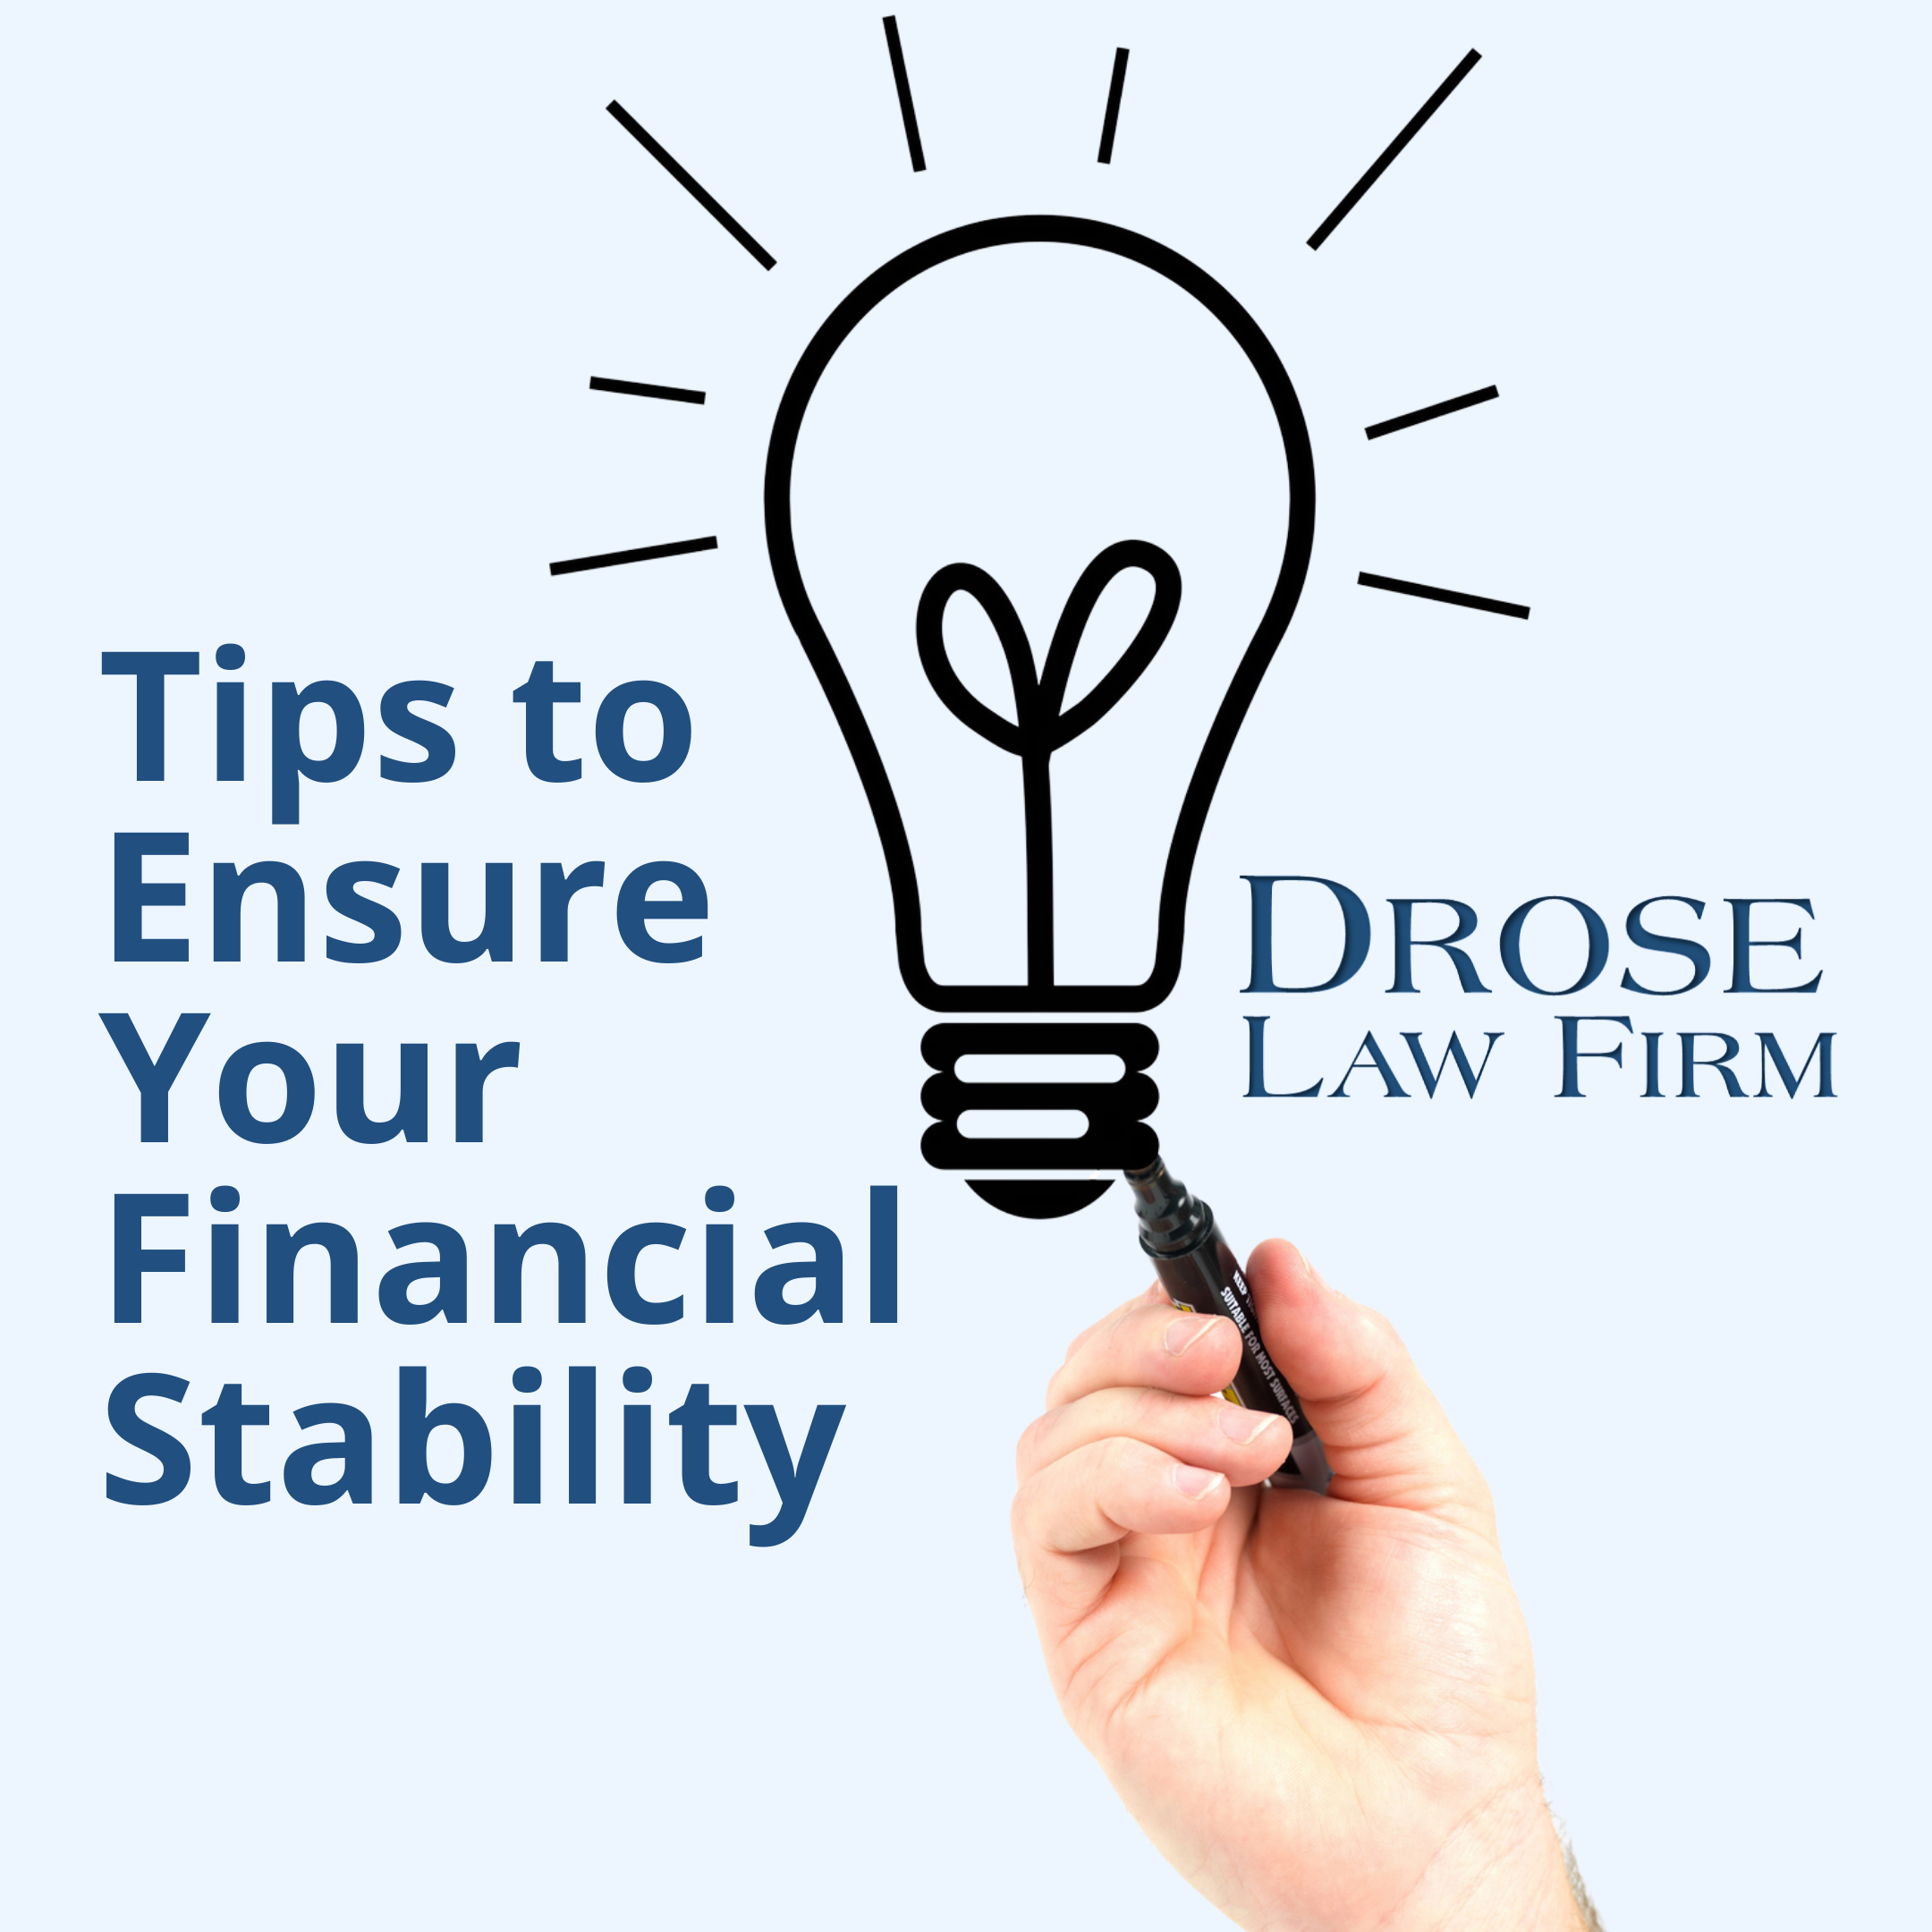 Tips to Ensure Your Financial Stability